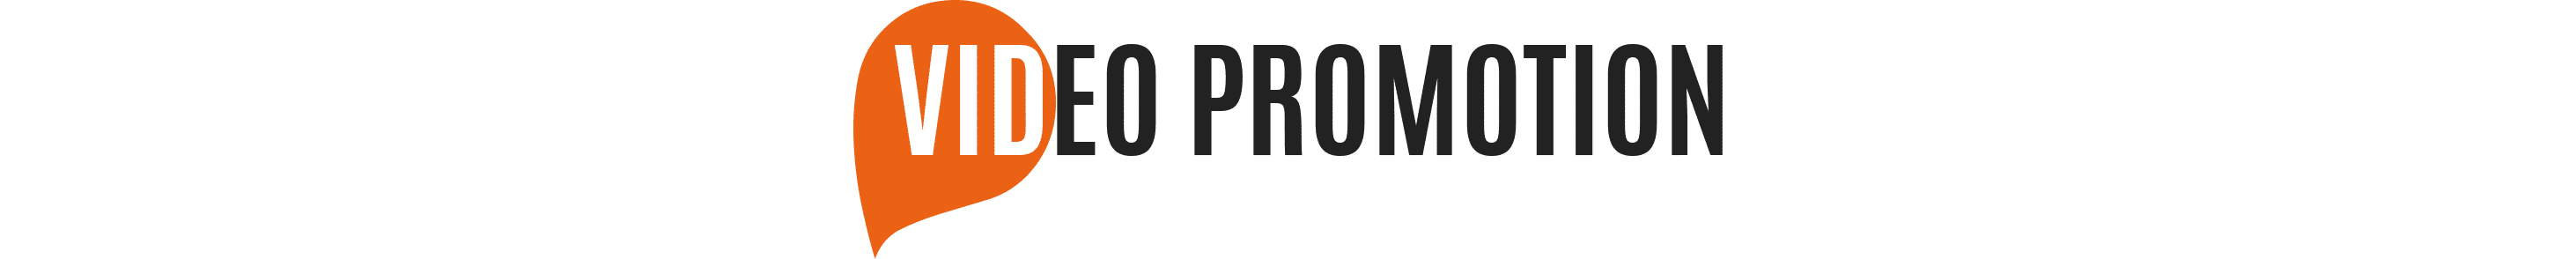 Video Promotion Packages